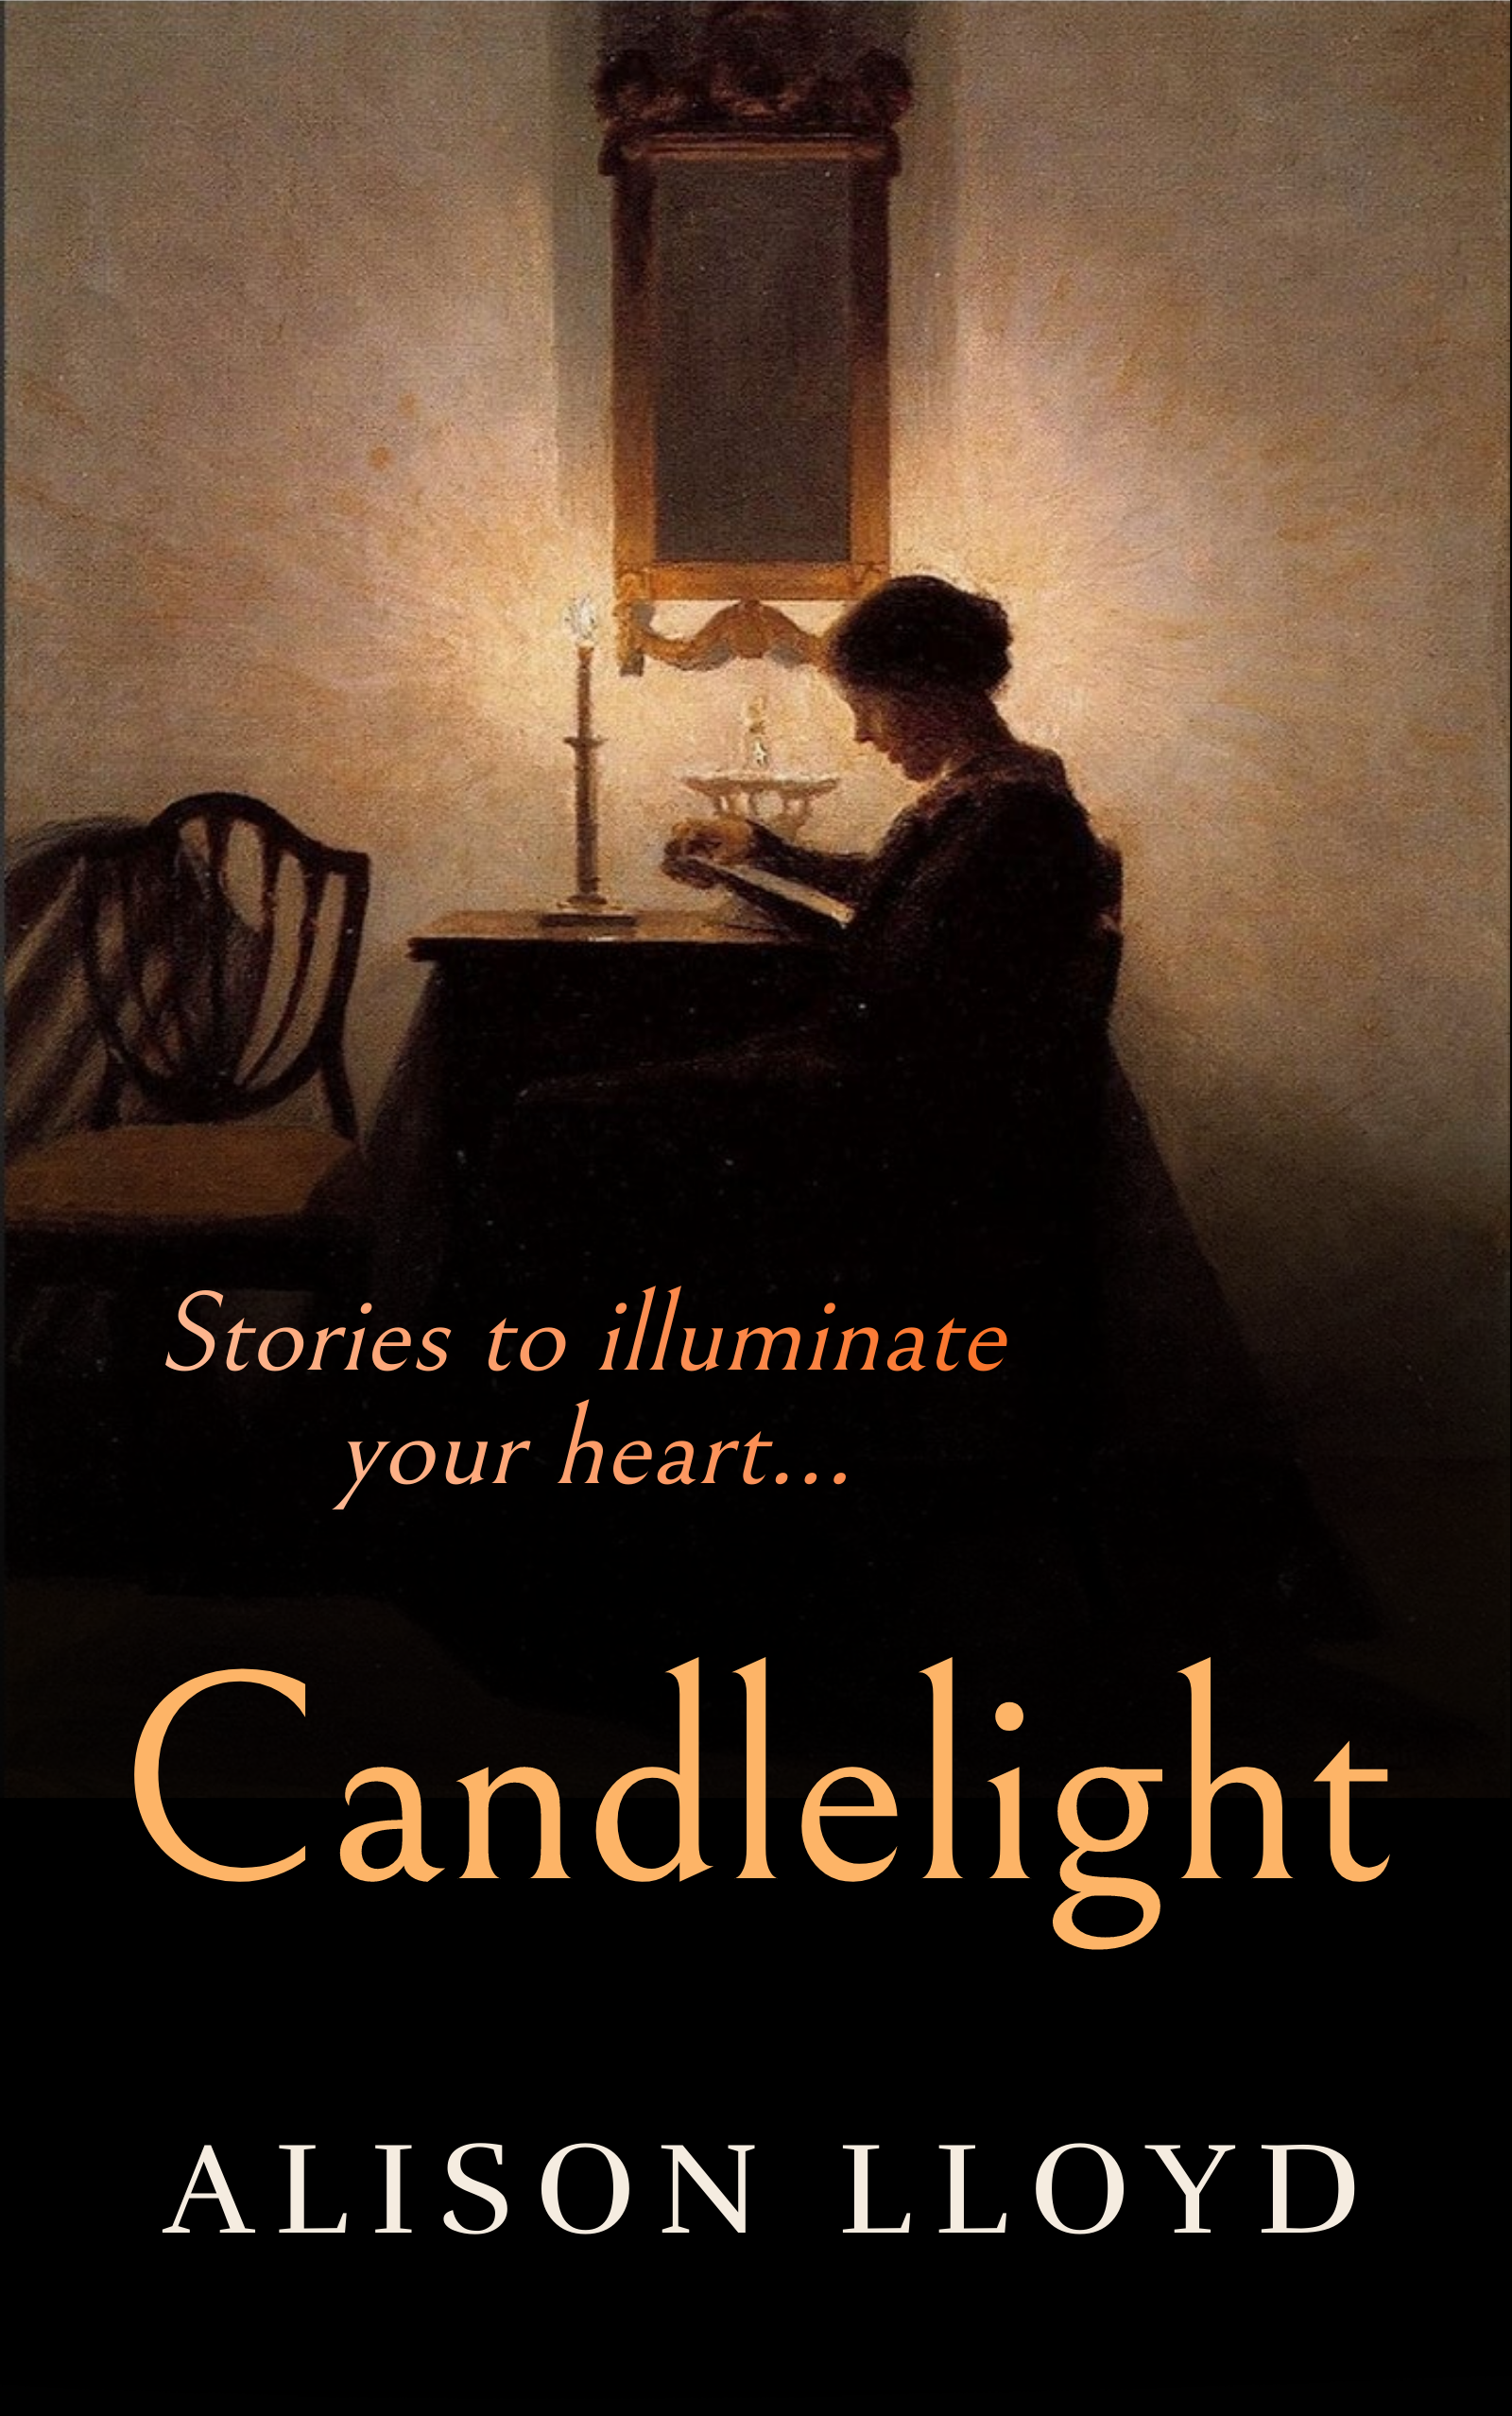 Candlelight by Alison Lloyd